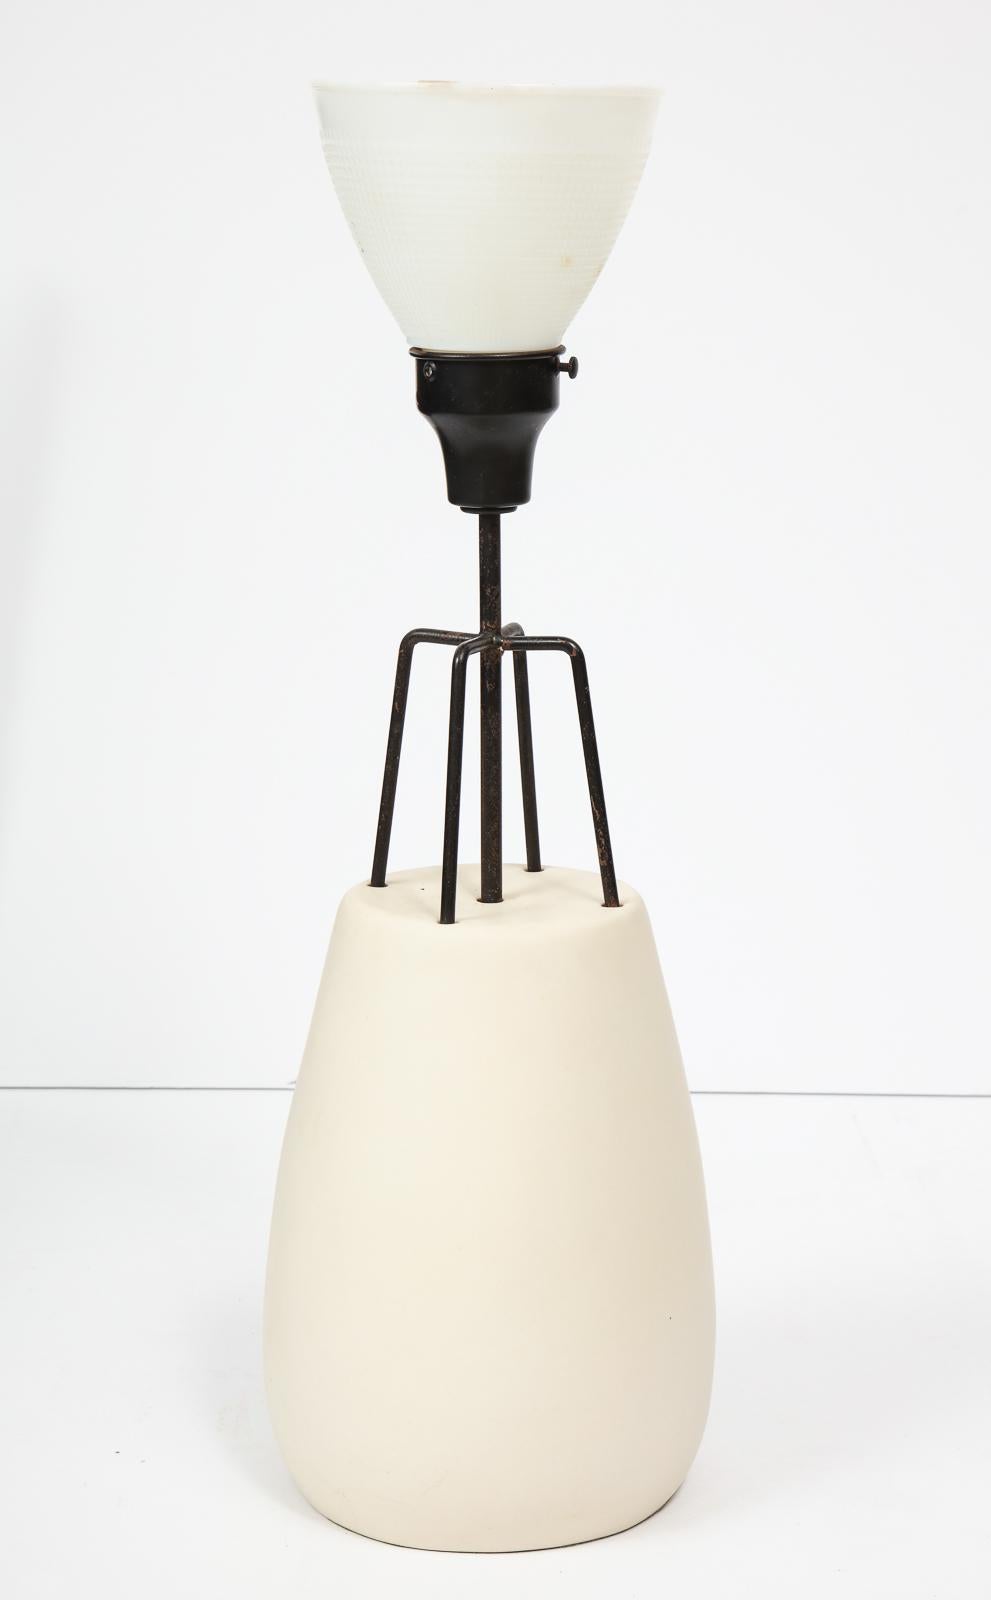 Ceramic and wrought iron table lamp designed by Ben Seibel for Raymor. A rare 1950s production by this under-appreciated designer. Height to the top of the glass diffuser is 25